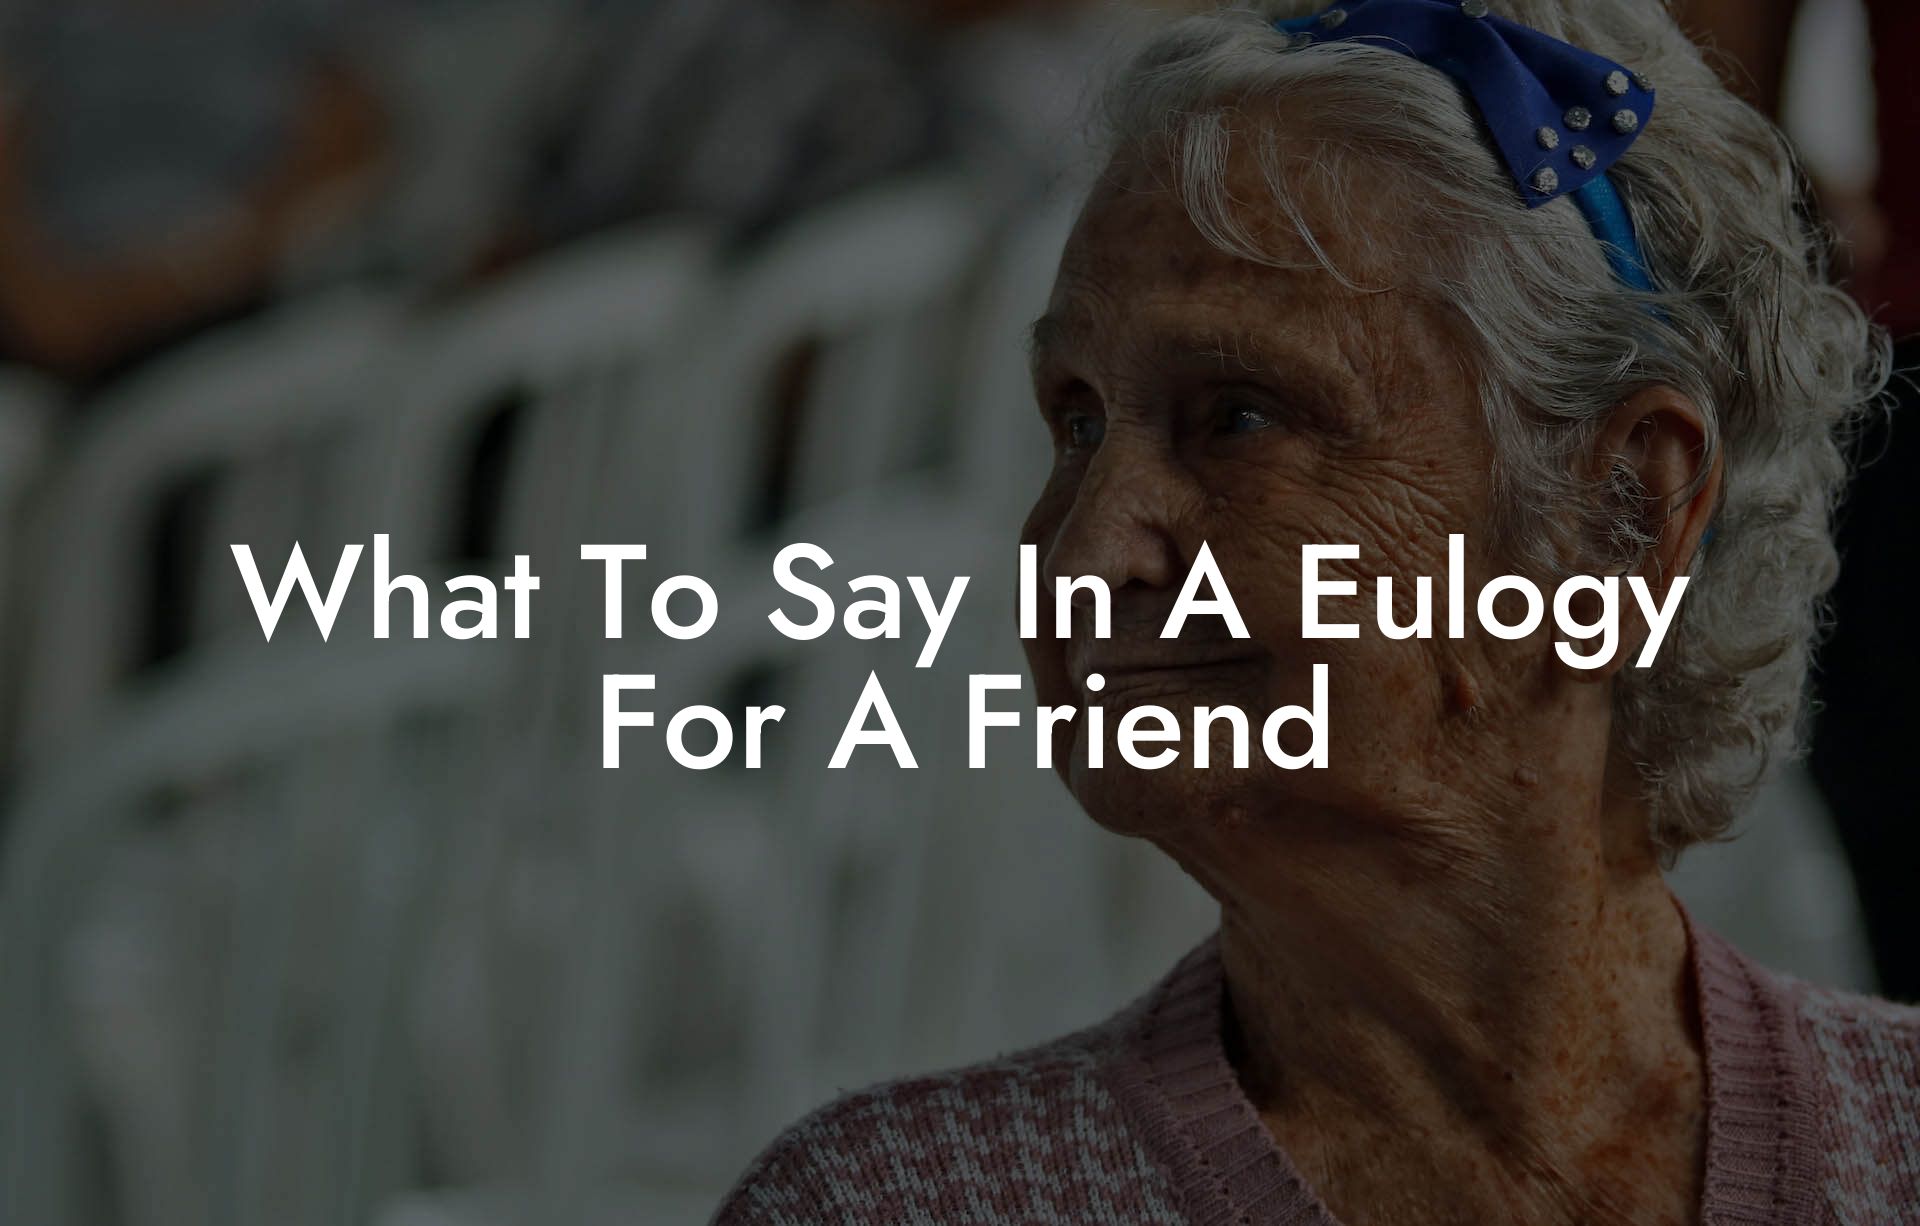 What To Say In A Eulogy For A Friend